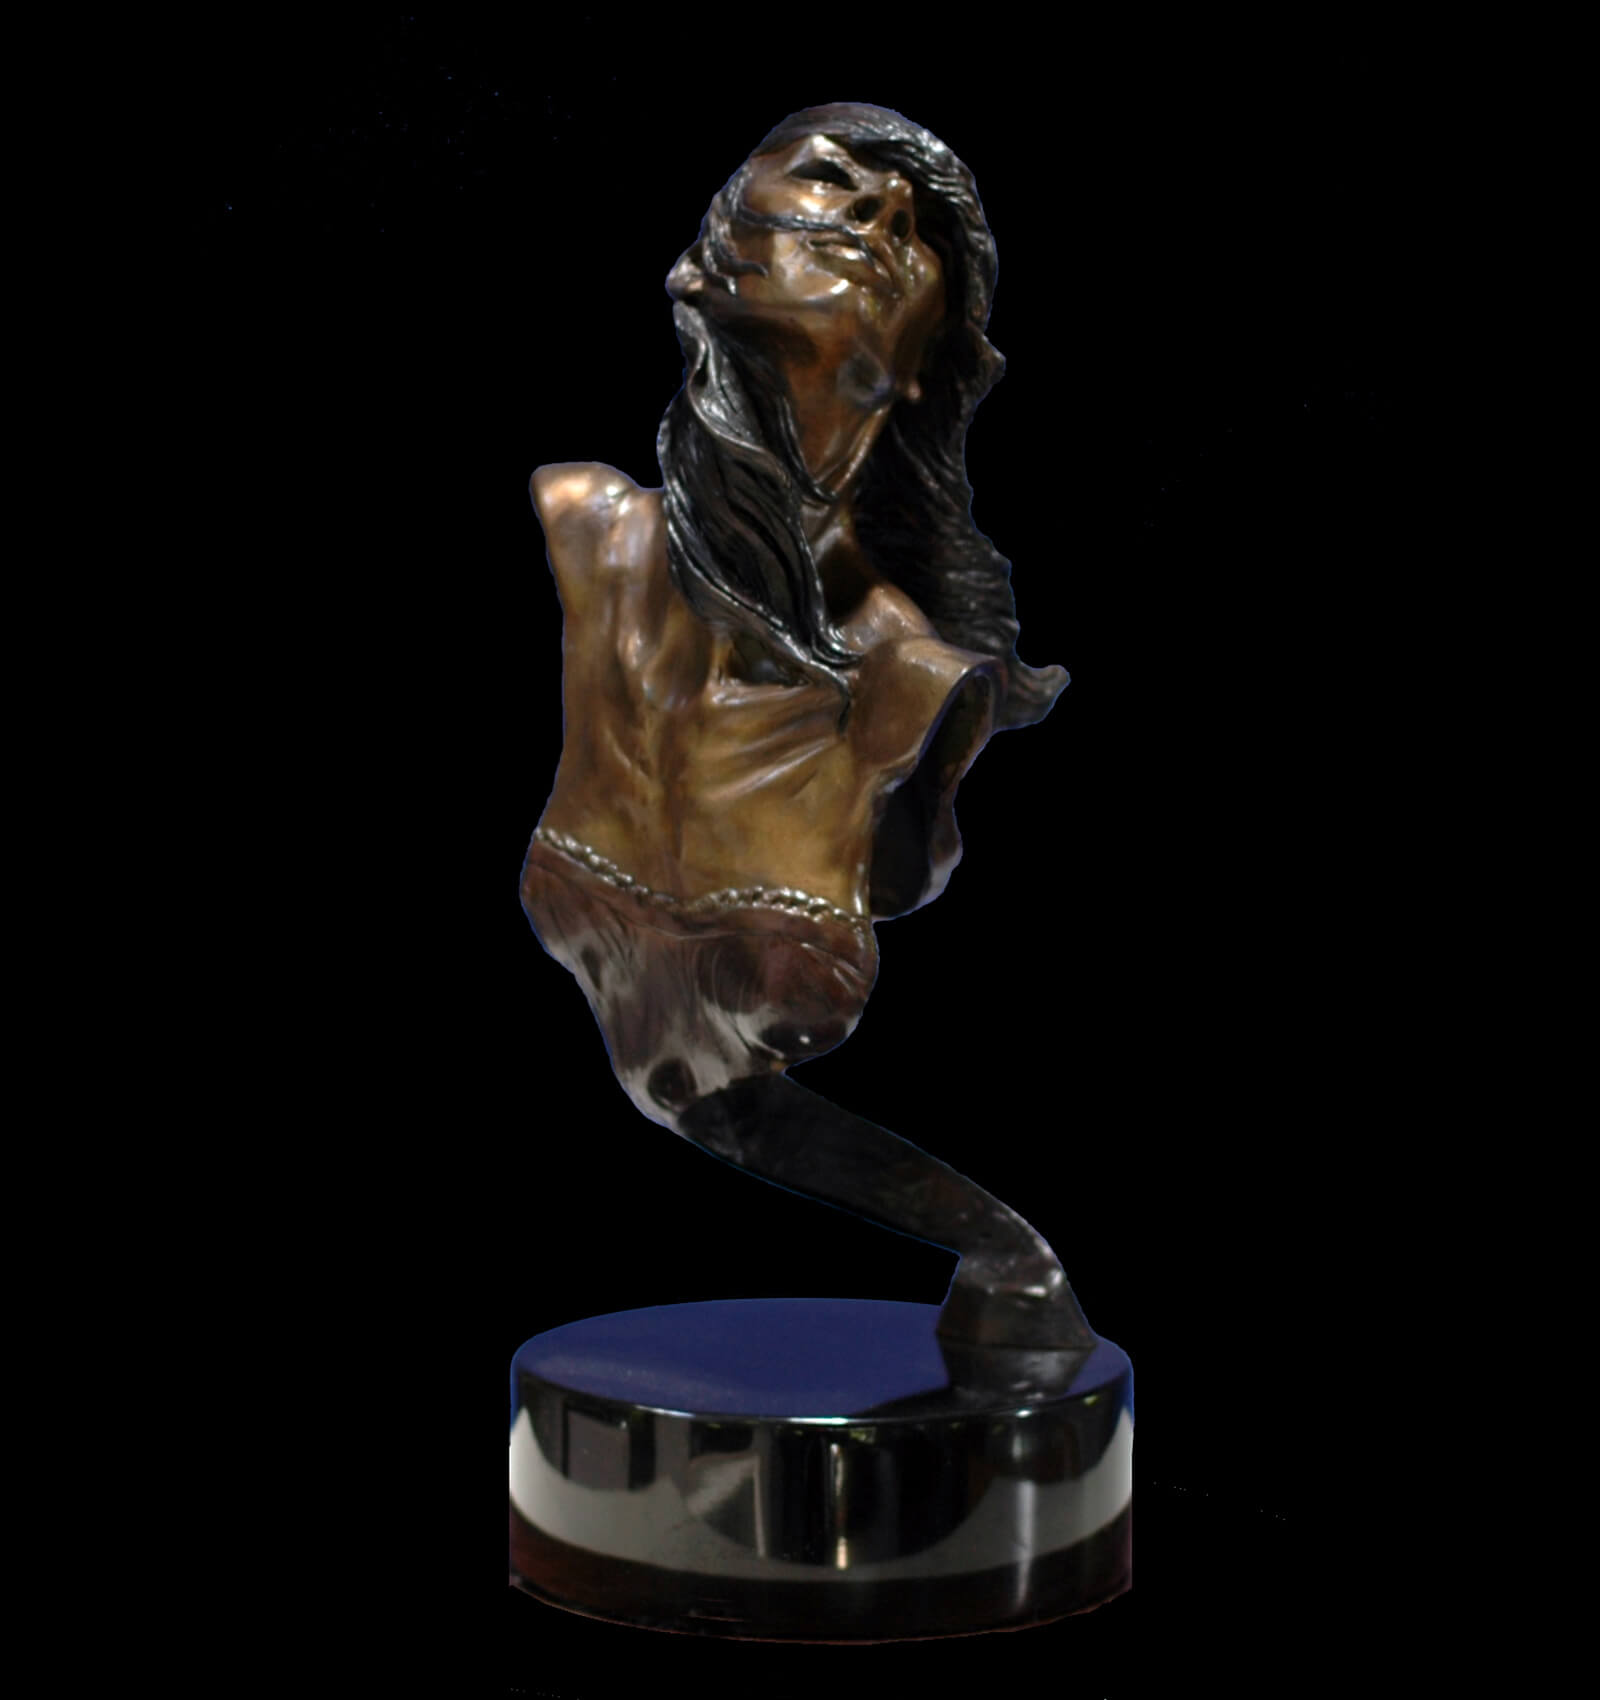 Heather Bust ⋆ Andrew Devries ⋆ Figurative Bronze Sculpture And Paintings